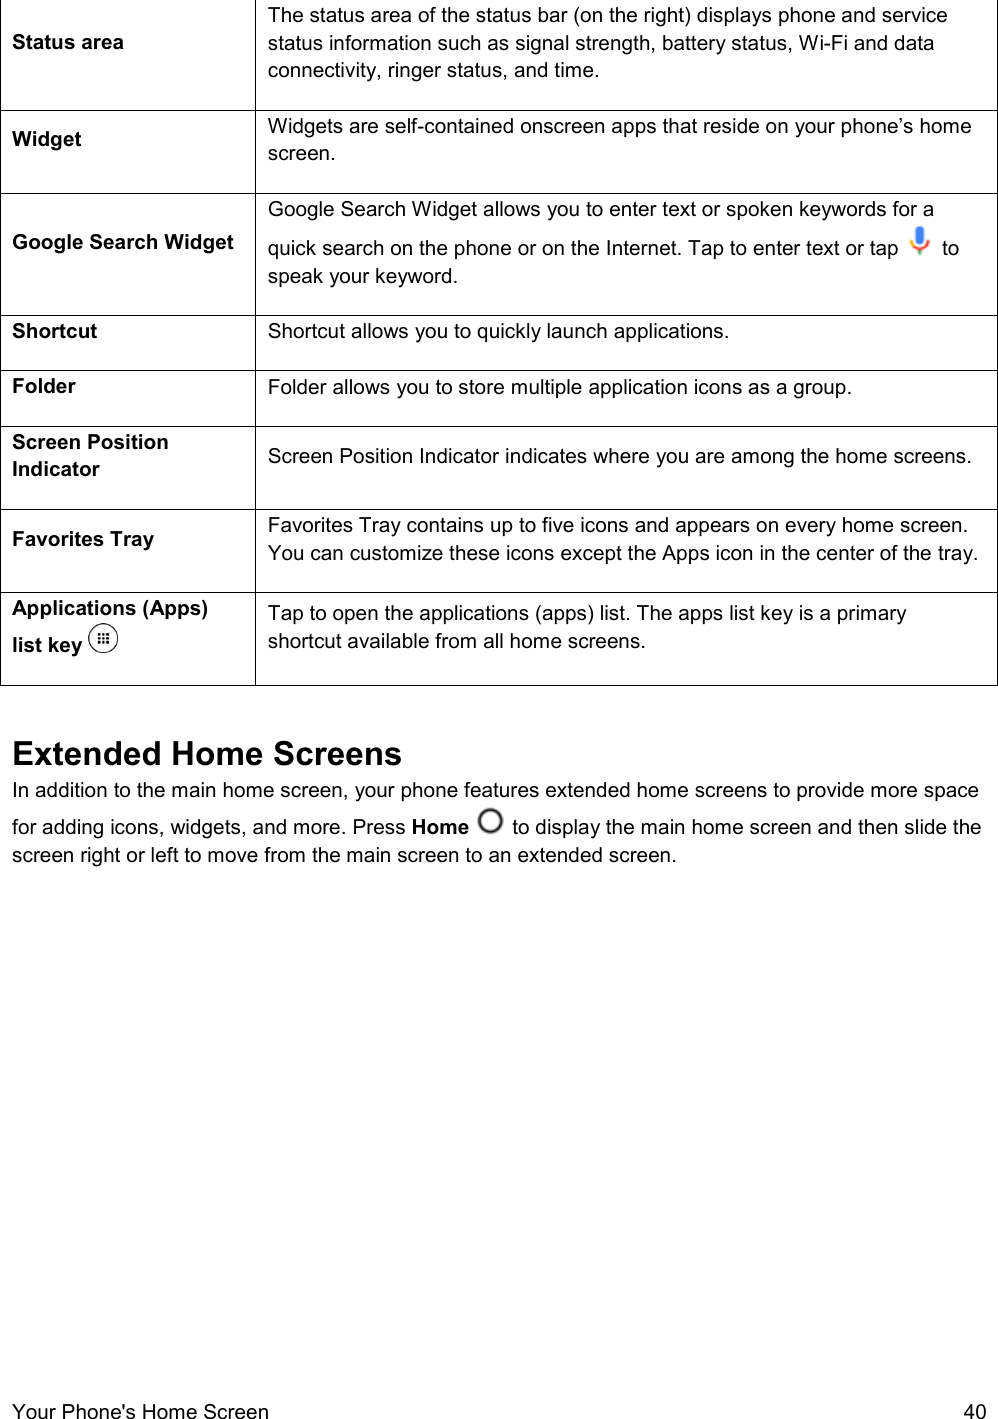  Your Phone&apos;s Home Screen  40 Status area  The status area of the status bar (on the right) displays phone and service status information such as signal strength, battery status, Wi-Fi and data connectivity, ringer status, and time. Widget  Widgets are self-contained onscreen apps that reside on your phone’s home screen. Google Search Widget Google Search Widget allows you to enter text or spoken keywords for a quick search on the phone or on the Internet. Tap to enter text or tap   to speak your keyword. Shortcut  Shortcut allows you to quickly launch applications. Folder Folder allows you to store multiple application icons as a group. Screen Position Indicator Screen Position Indicator indicates where you are among the home screens. Favorites Tray Favorites Tray contains up to five icons and appears on every home screen. You can customize these icons except the Apps icon in the center of the tray. Applications (Apps) list key   Tap to open the applications (apps) list. The apps list key is a primary shortcut available from all home screens.  Extended Home Screens In addition to the main home screen, your phone features extended home screens to provide more space for adding icons, widgets, and more. Press Home   to display the main home screen and then slide the screen right or left to move from the main screen to an extended screen.  